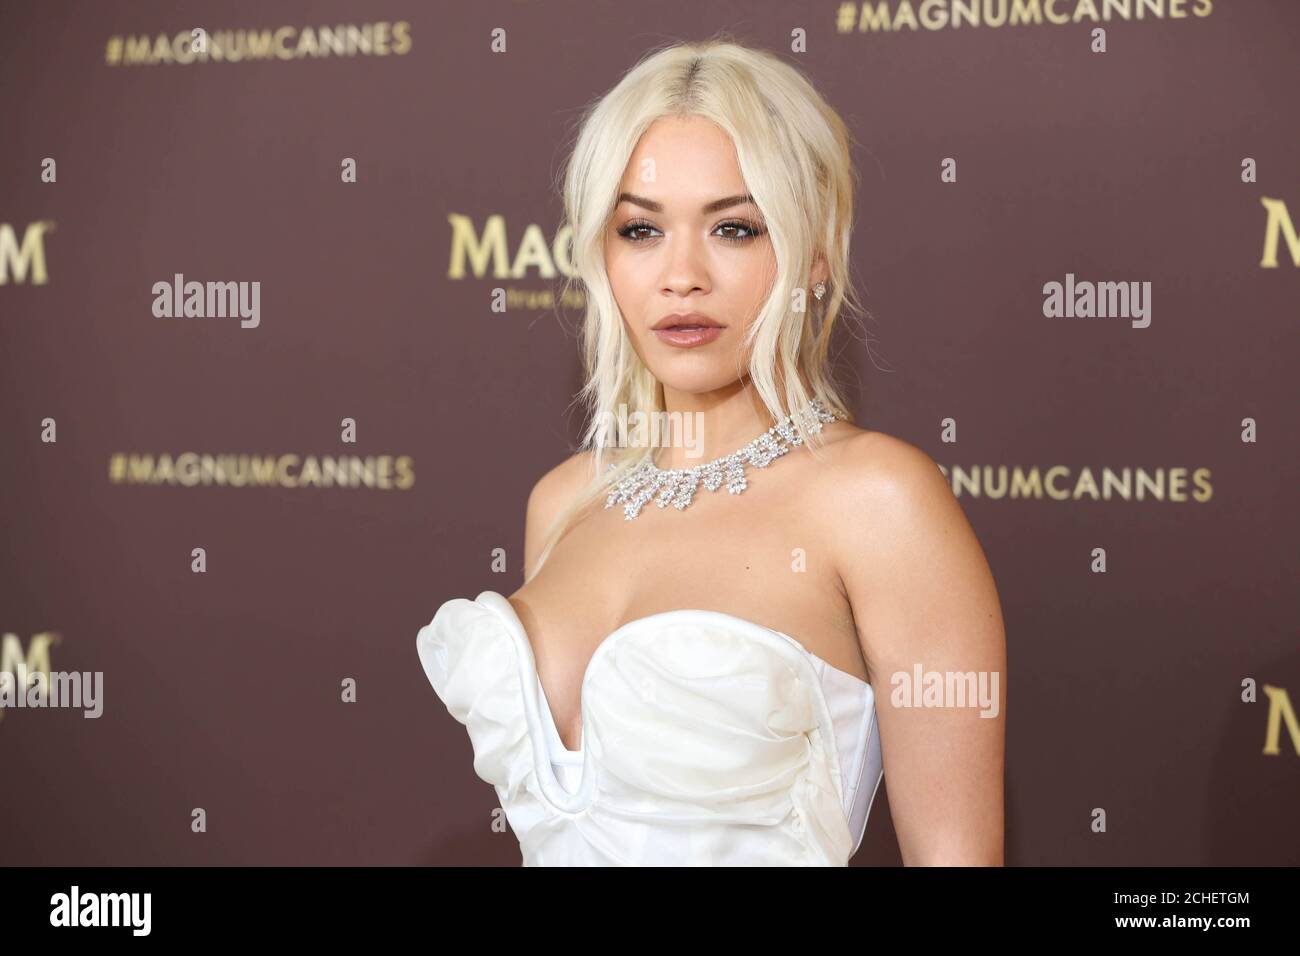 Rita Ora arrives in Cannes for an intimate acoustic performance to celebrate Magnum's iconic range of expertly crafted ice creams #TrueToPleasure. Stock Photo